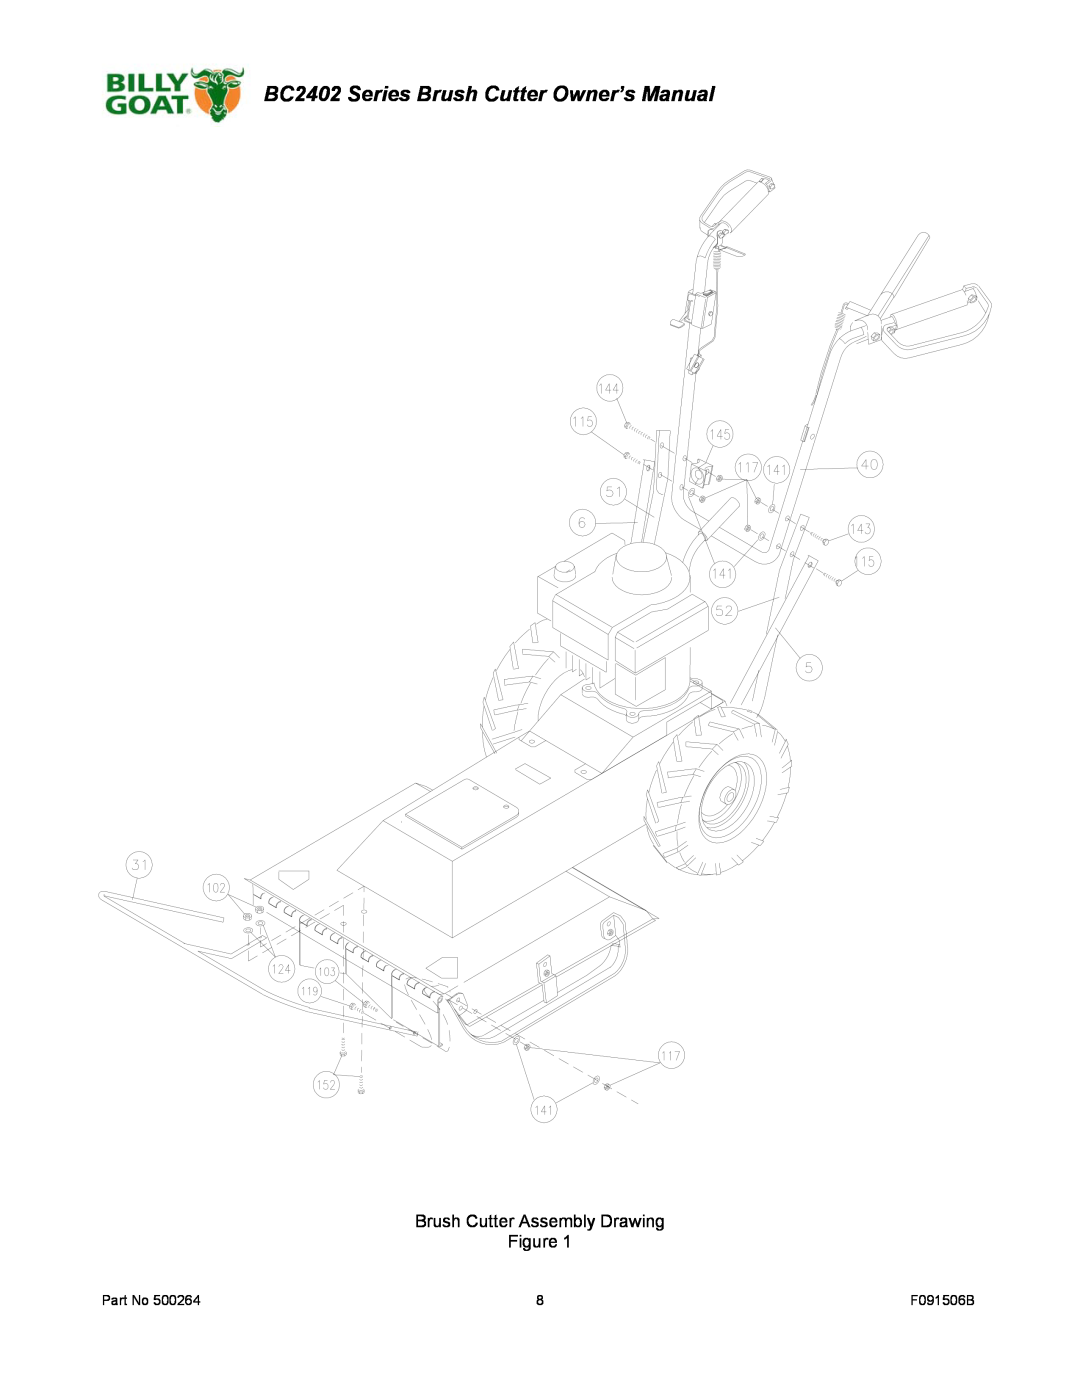 Billy Goat BC2402 owner manual Brush Cutter Assembly Drawing 